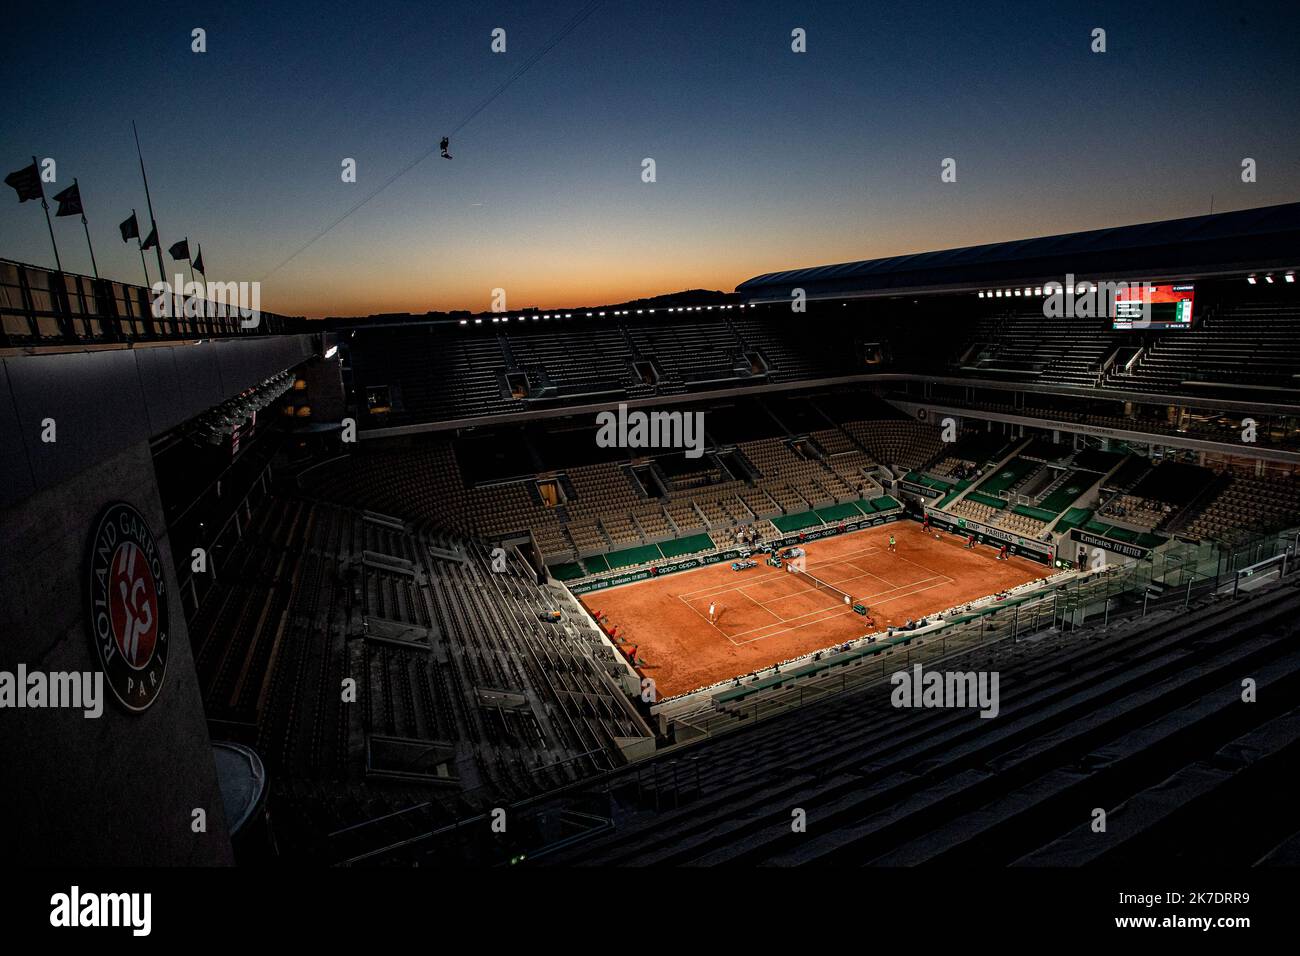 Aurelien Morissard / IP3 ; Atmosphere during the first round of the French Open tennis tournament at Roland Garros in Paris, France, 1 June 2021. Roland Garros 2021 will run from 30 May to 13 June 2021. Stock Photo